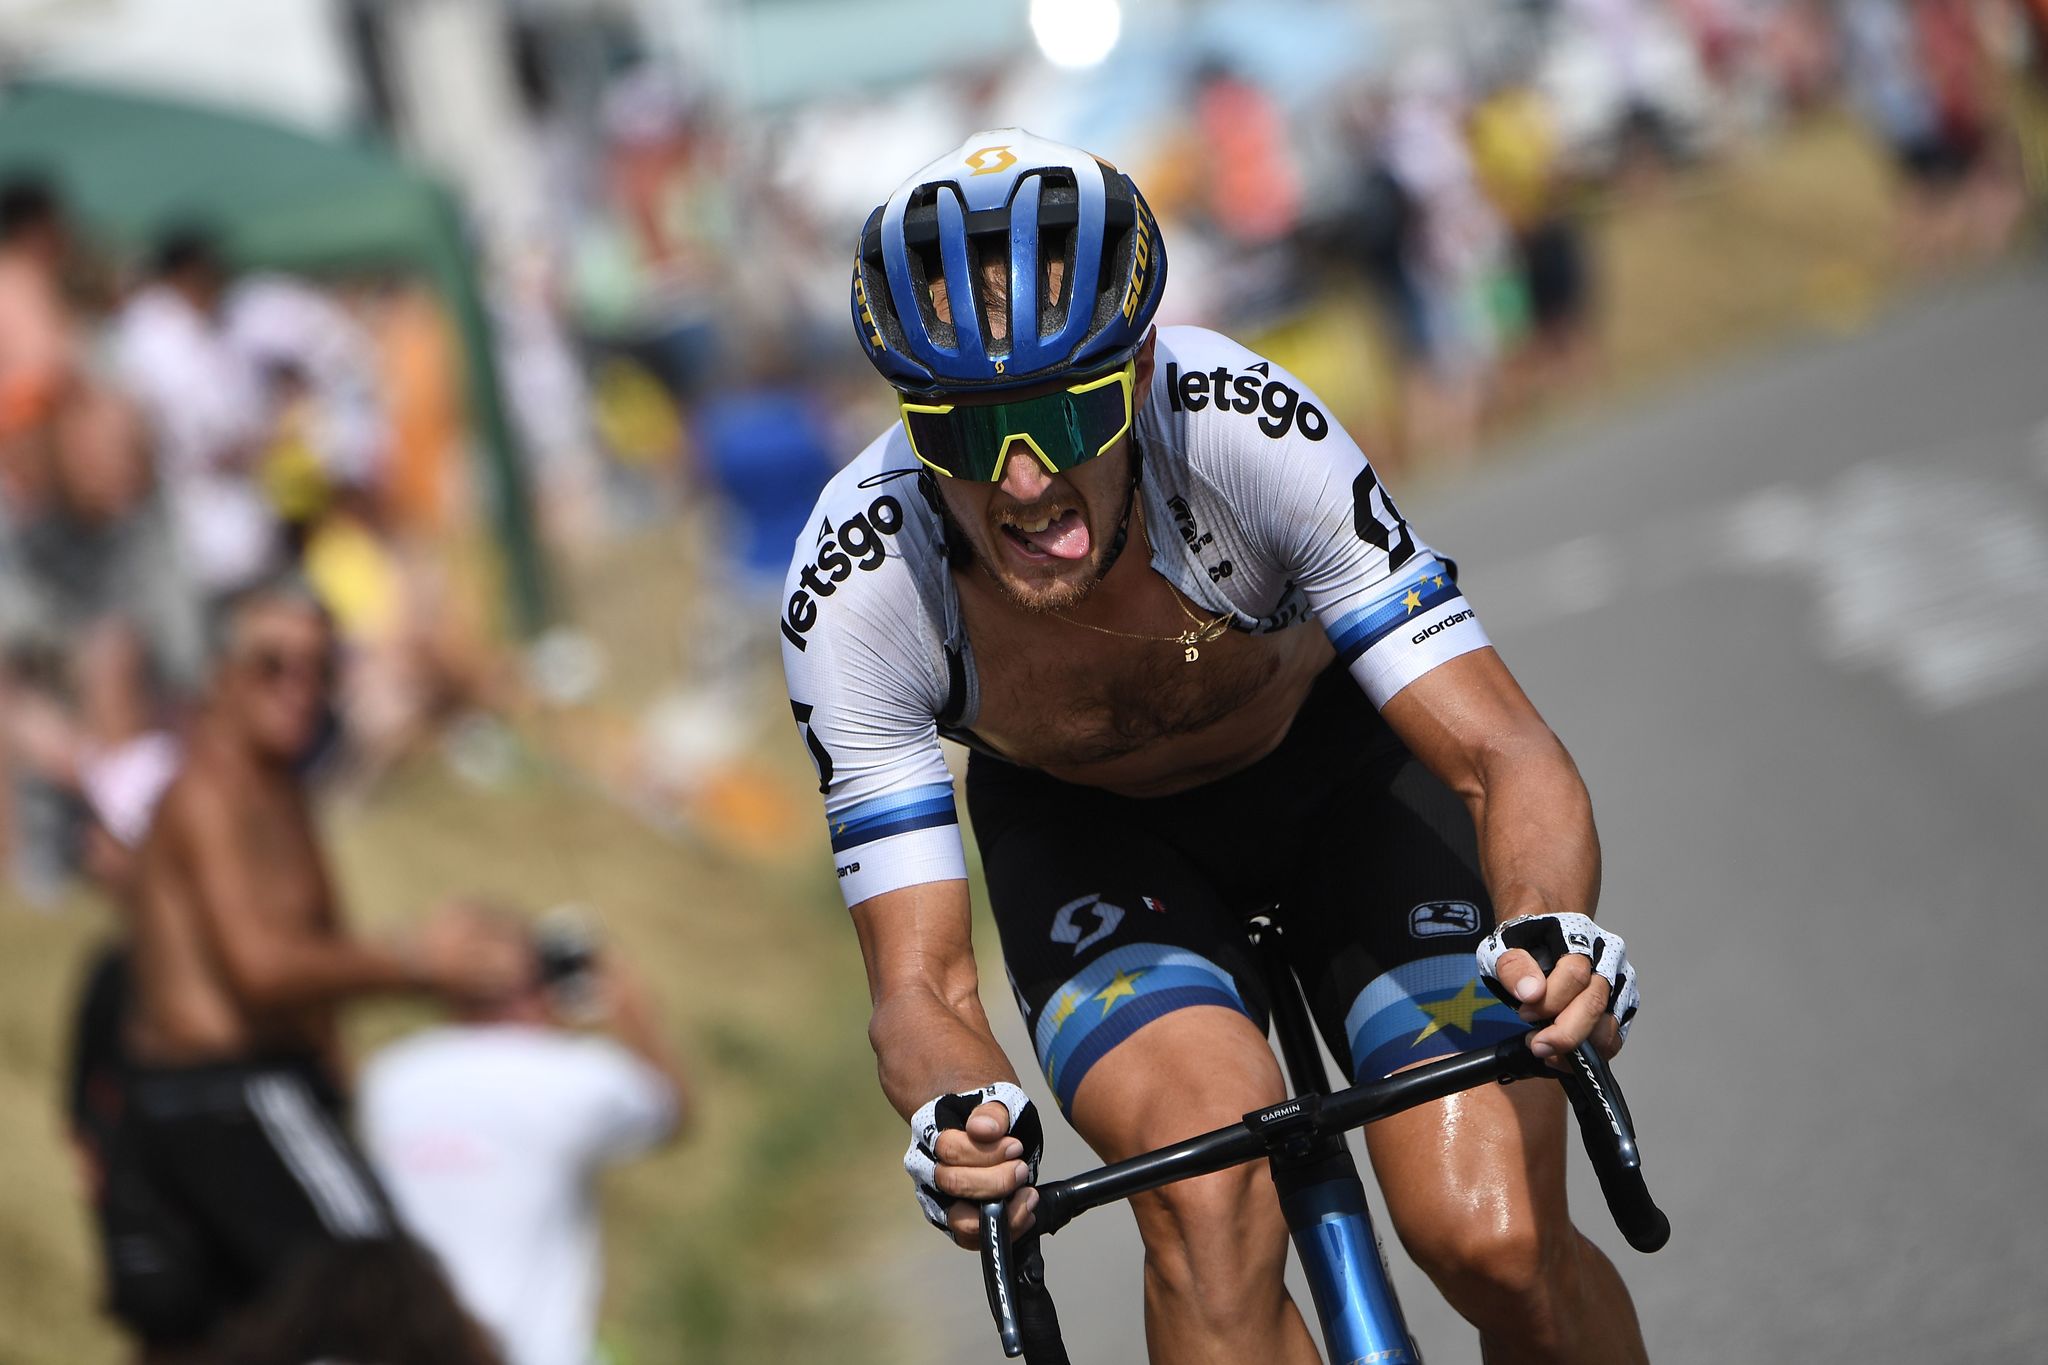 TOPSHOT - Italys Matteo <HIT>Trentin</HIT> leads the race during the seventeenth stage of the 106th edition of the Tour de France cycling race between Pont du Gard and Gap, in Gap, on July 24, 2019. (Photo by JEFF PACHOUD / AFP)